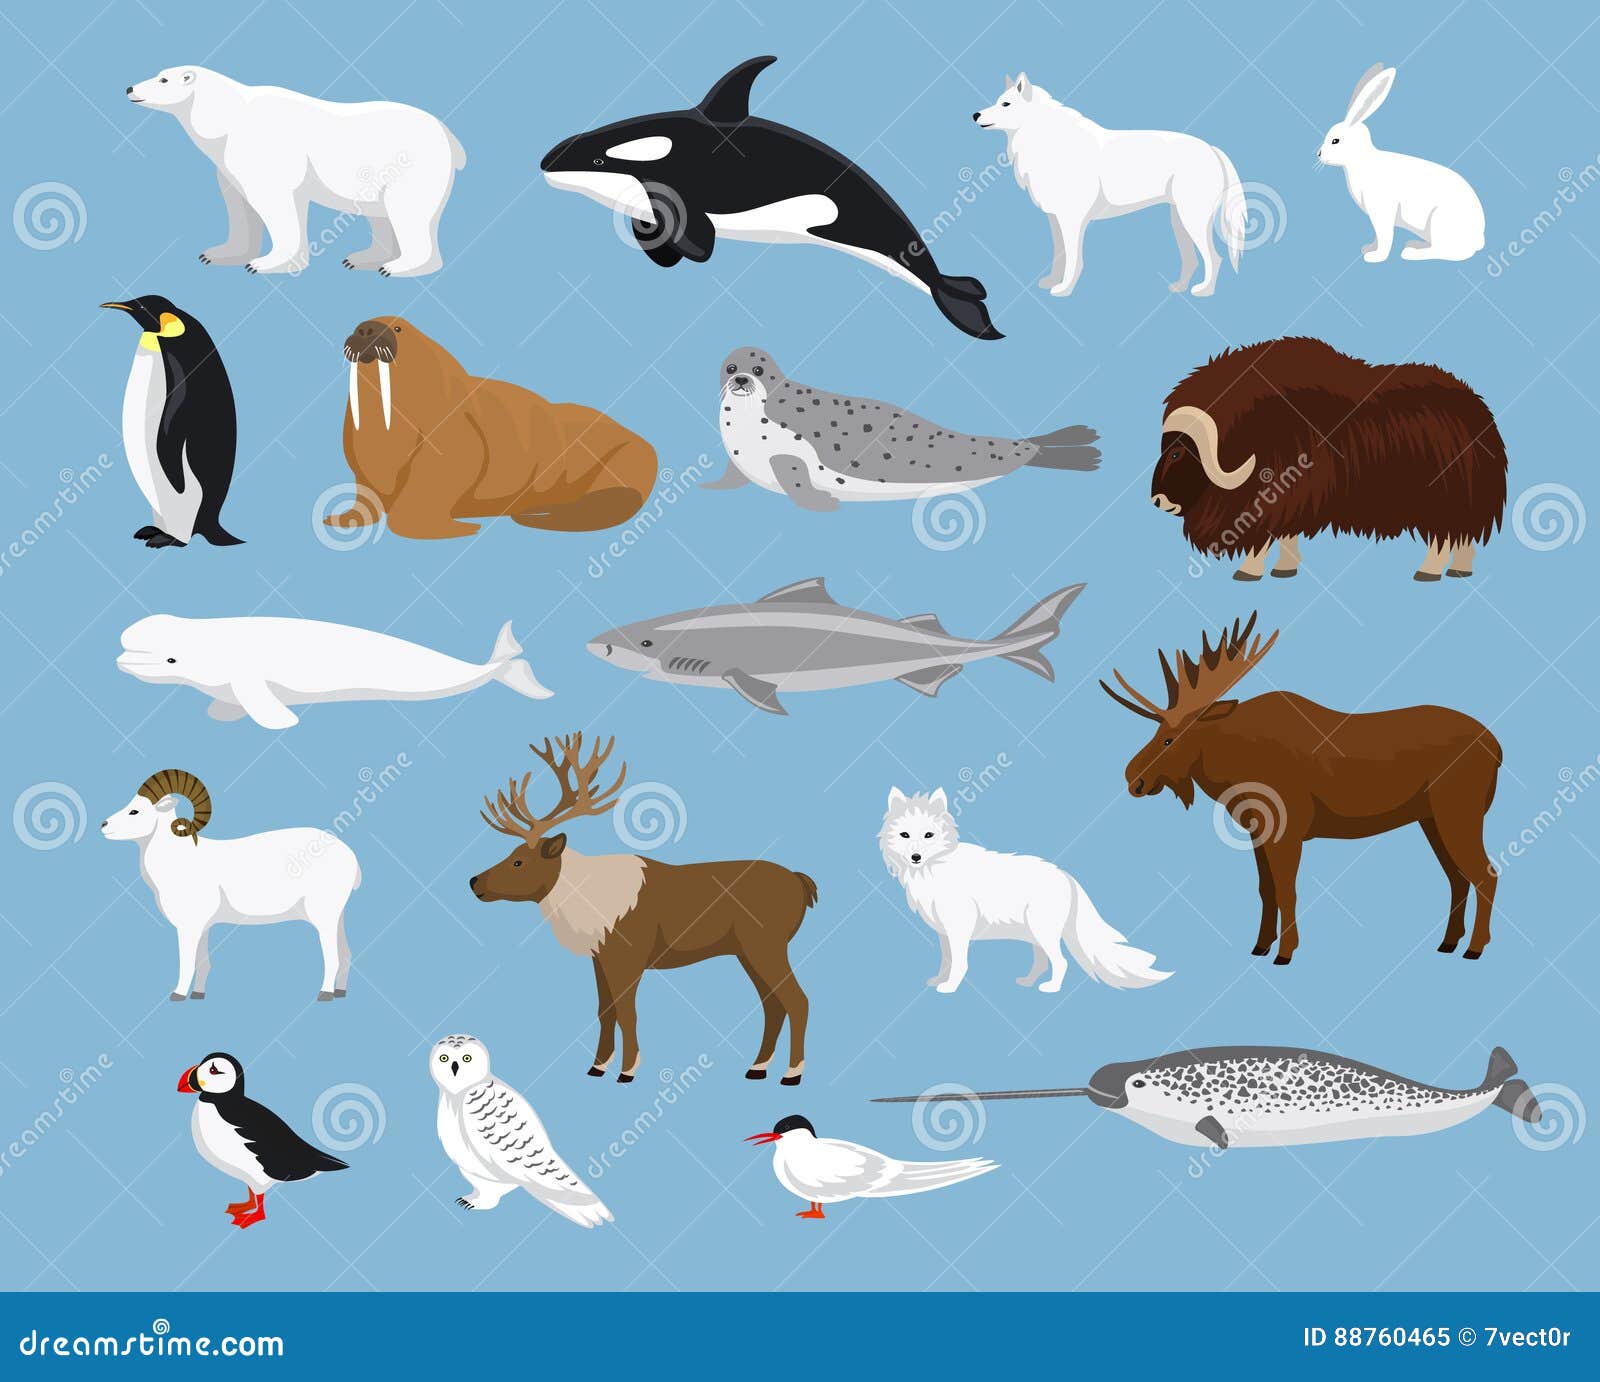 Arctic animals collection stock vector. Illustration of blue - 88760465